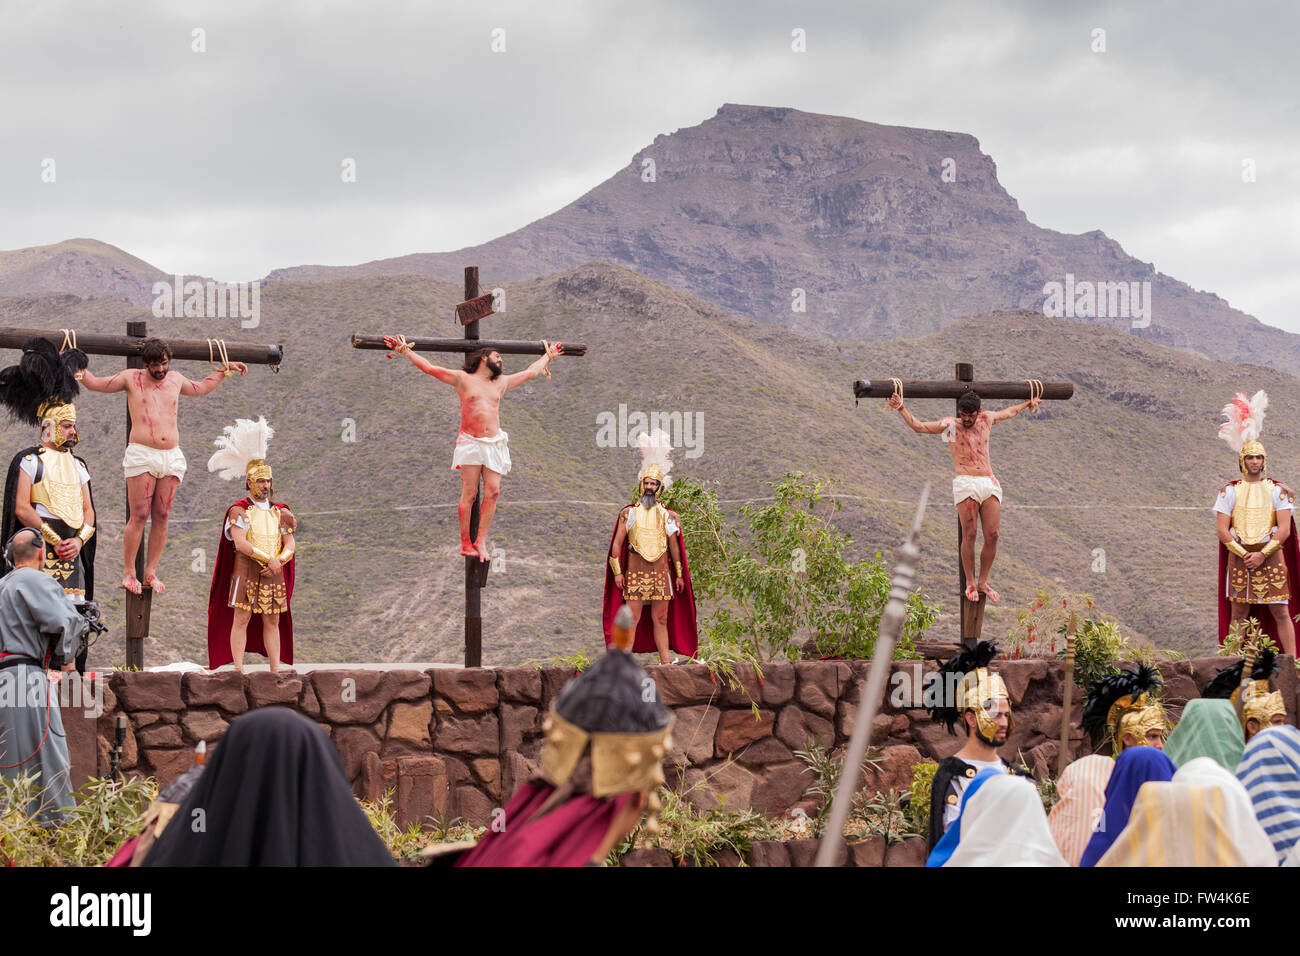 Jesus and the thieves crucified at Calvary, Passion play, Adeje, Tenerife, Canary Islands, Spain. Representacion de la Pasion. A Stock Photo